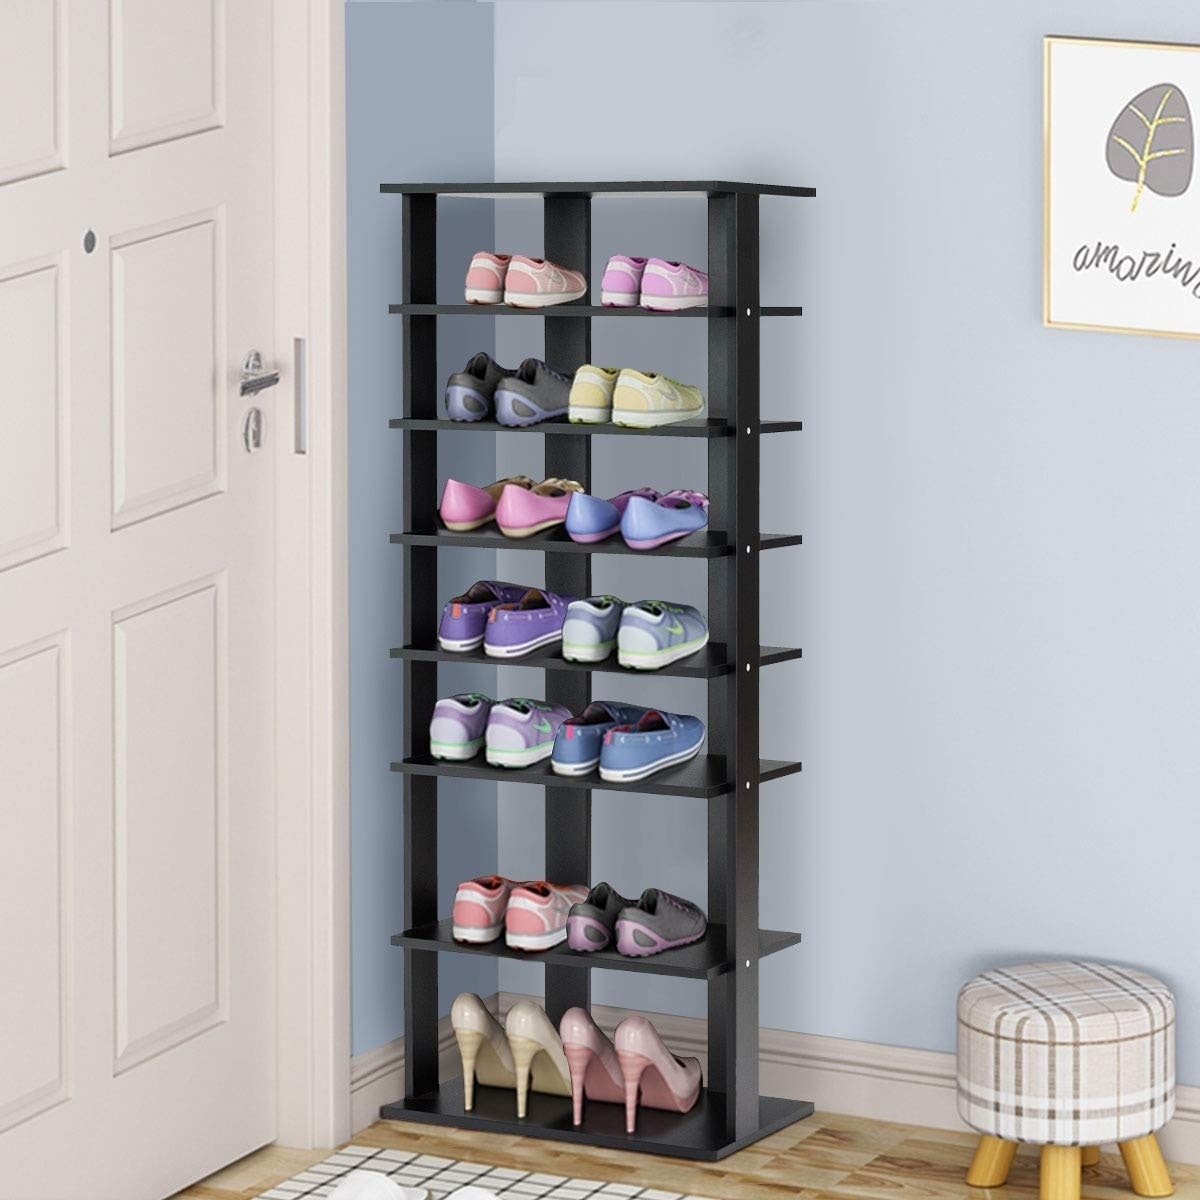 https://ak1.ostkcdn.com/images/products/is/images/direct/728499d5e93fc3e9f8a795ca53ef1b975281177a/7-Tier-Dual-Shoe-Rack-Free-Standing-Shelves-Storage-Shelves-Concise-Black.jpg